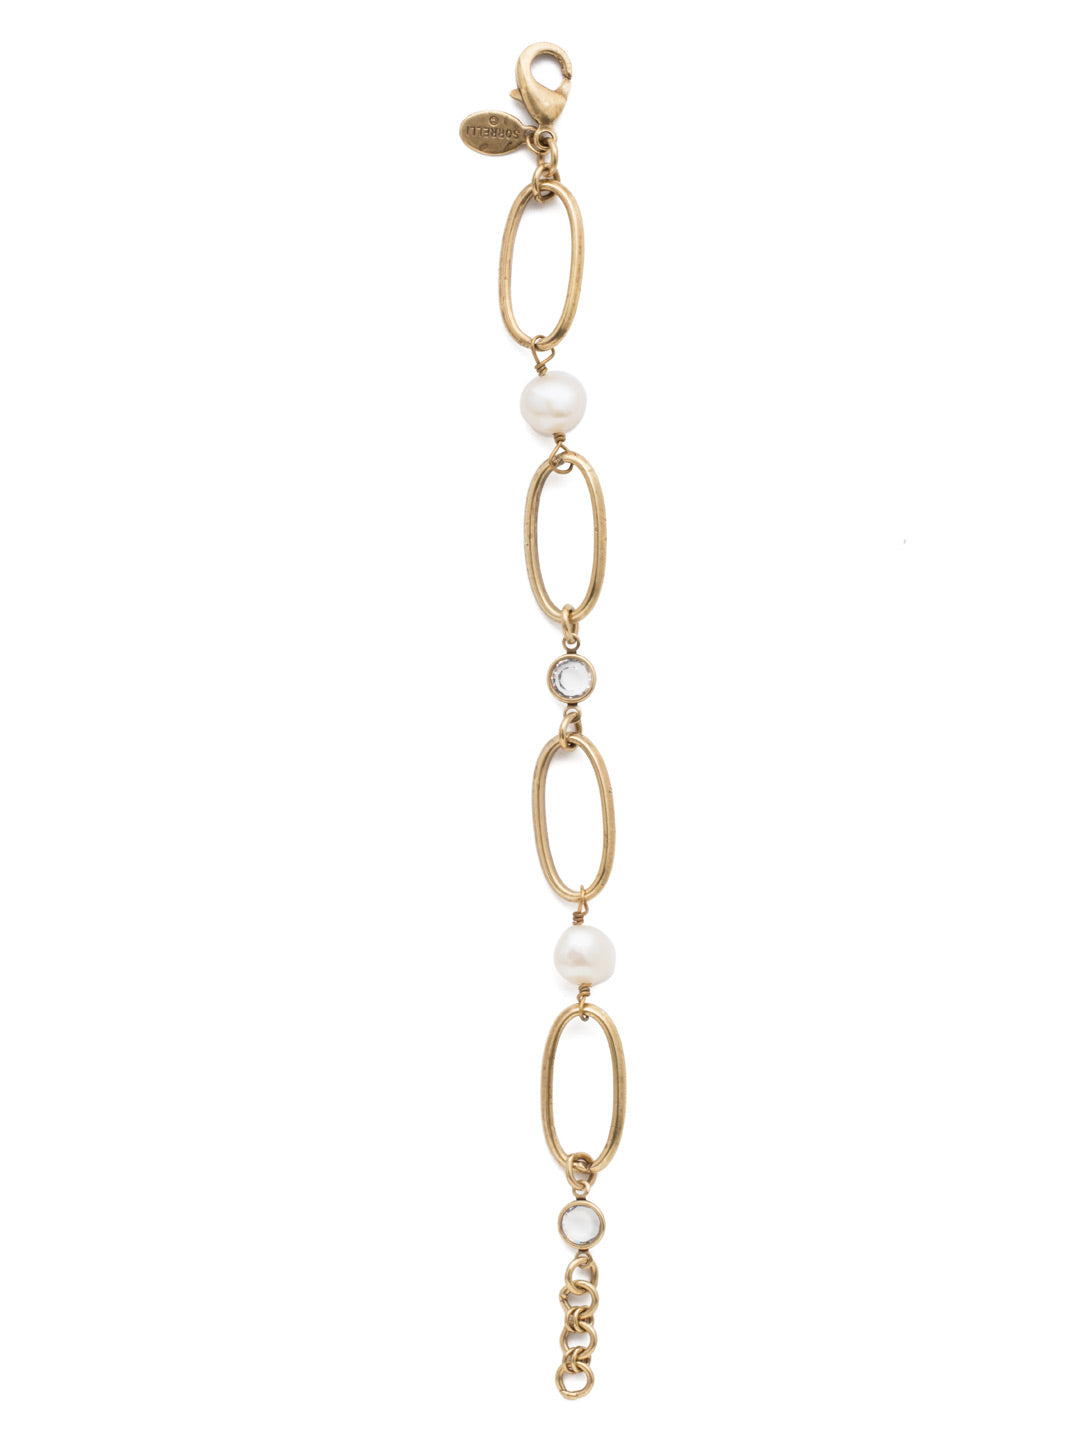 Melody Tennis Bracelet - 4BET5AGMDP - <p>Combine airy metal links, a touch of clear gems and freshwater pearls and you have the Melody Tennis Bracelet. From Sorrelli's Modern Pearl collection in our Antique Gold-tone finish.</p>